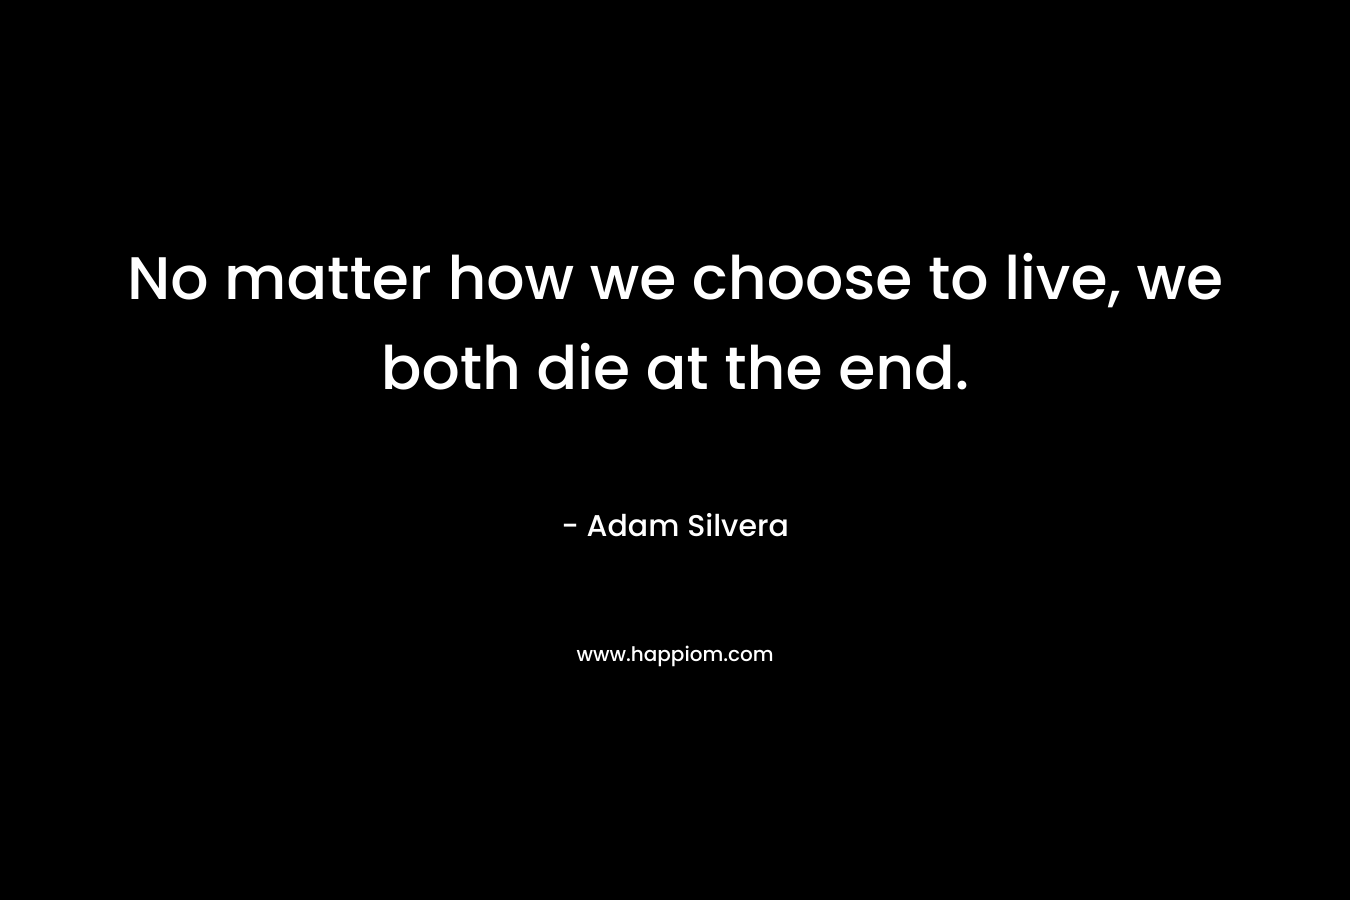 No matter how we choose to live, we both die at the end. – Adam Silvera